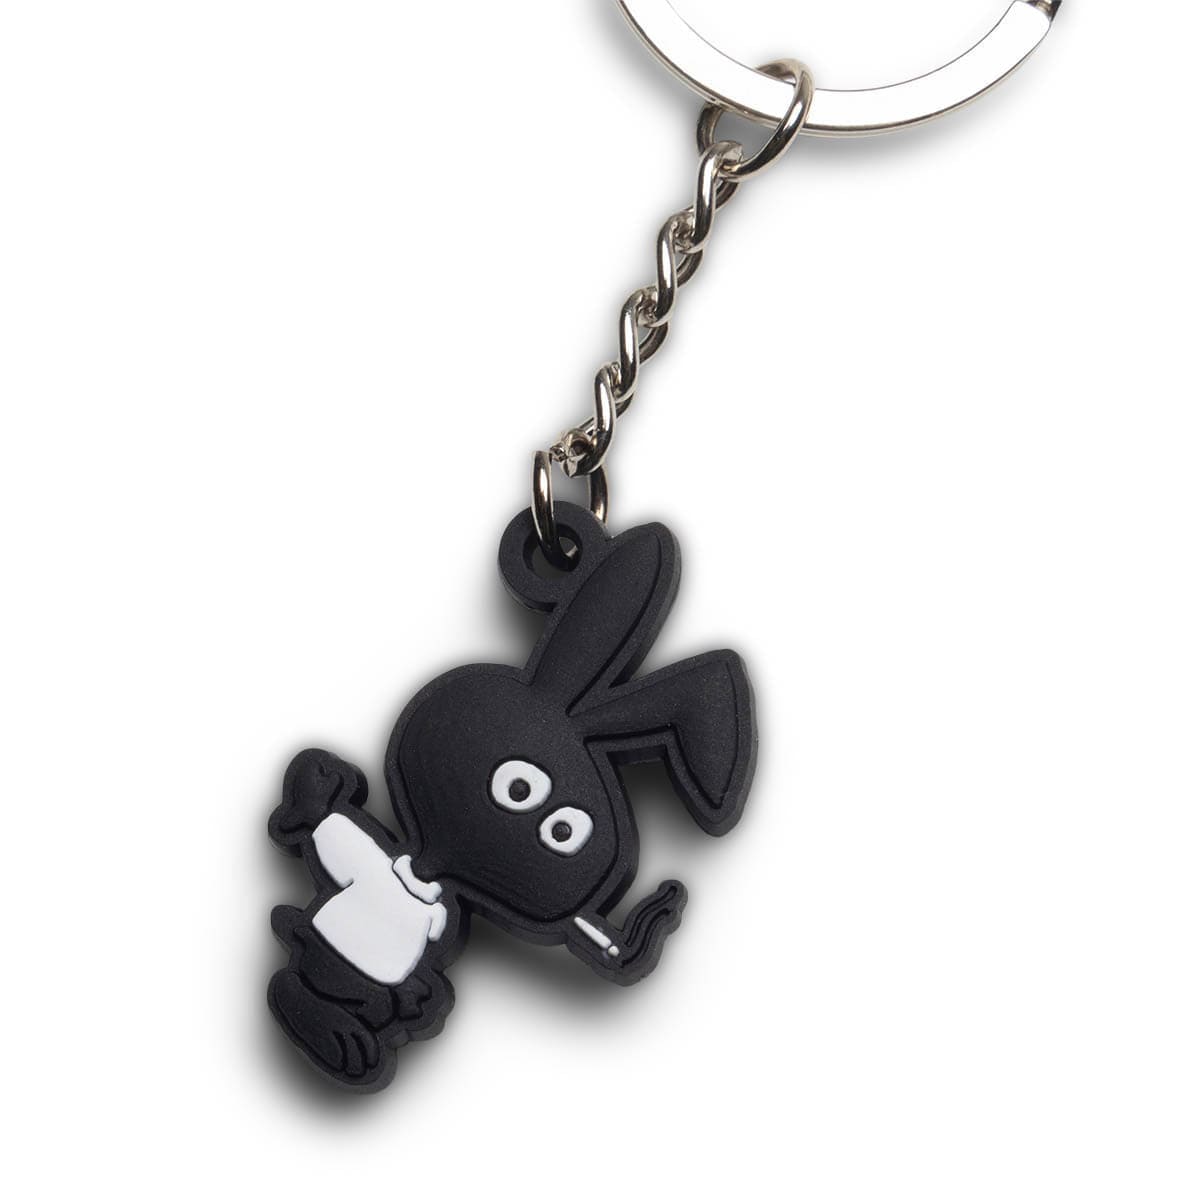 Cold World Frozen Goods Odds & Ends BLACK / O/S COLD BUNNY RUBBER KEY CHAIN